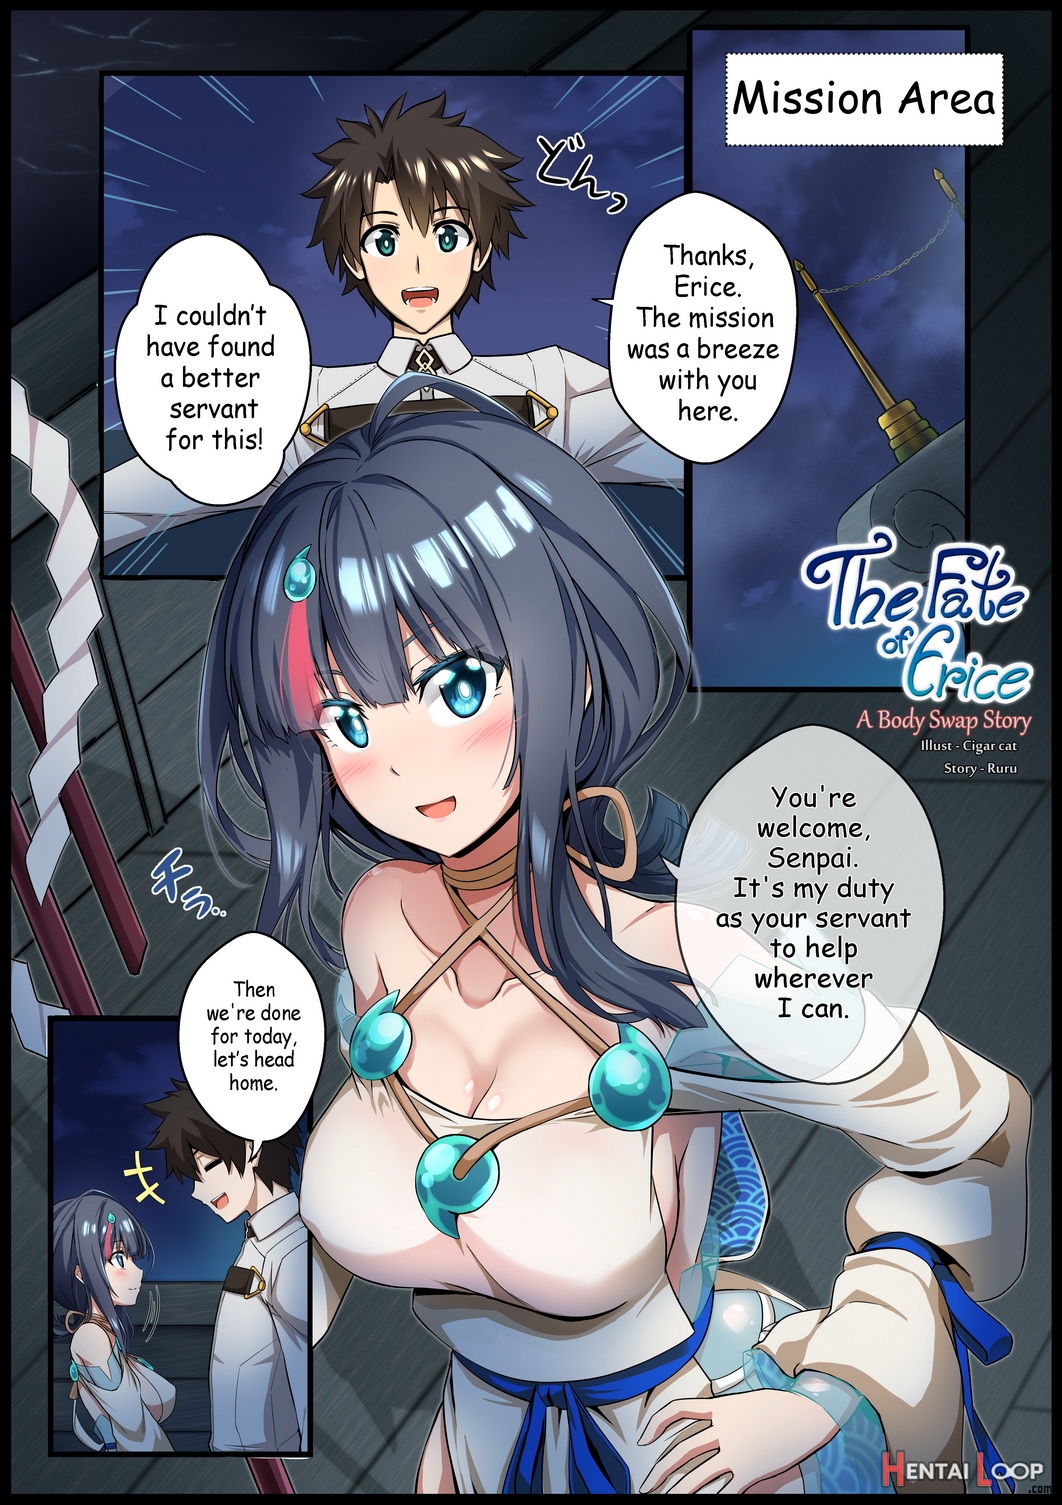 The Fate Of Erice -a Body Swap Story- page 2